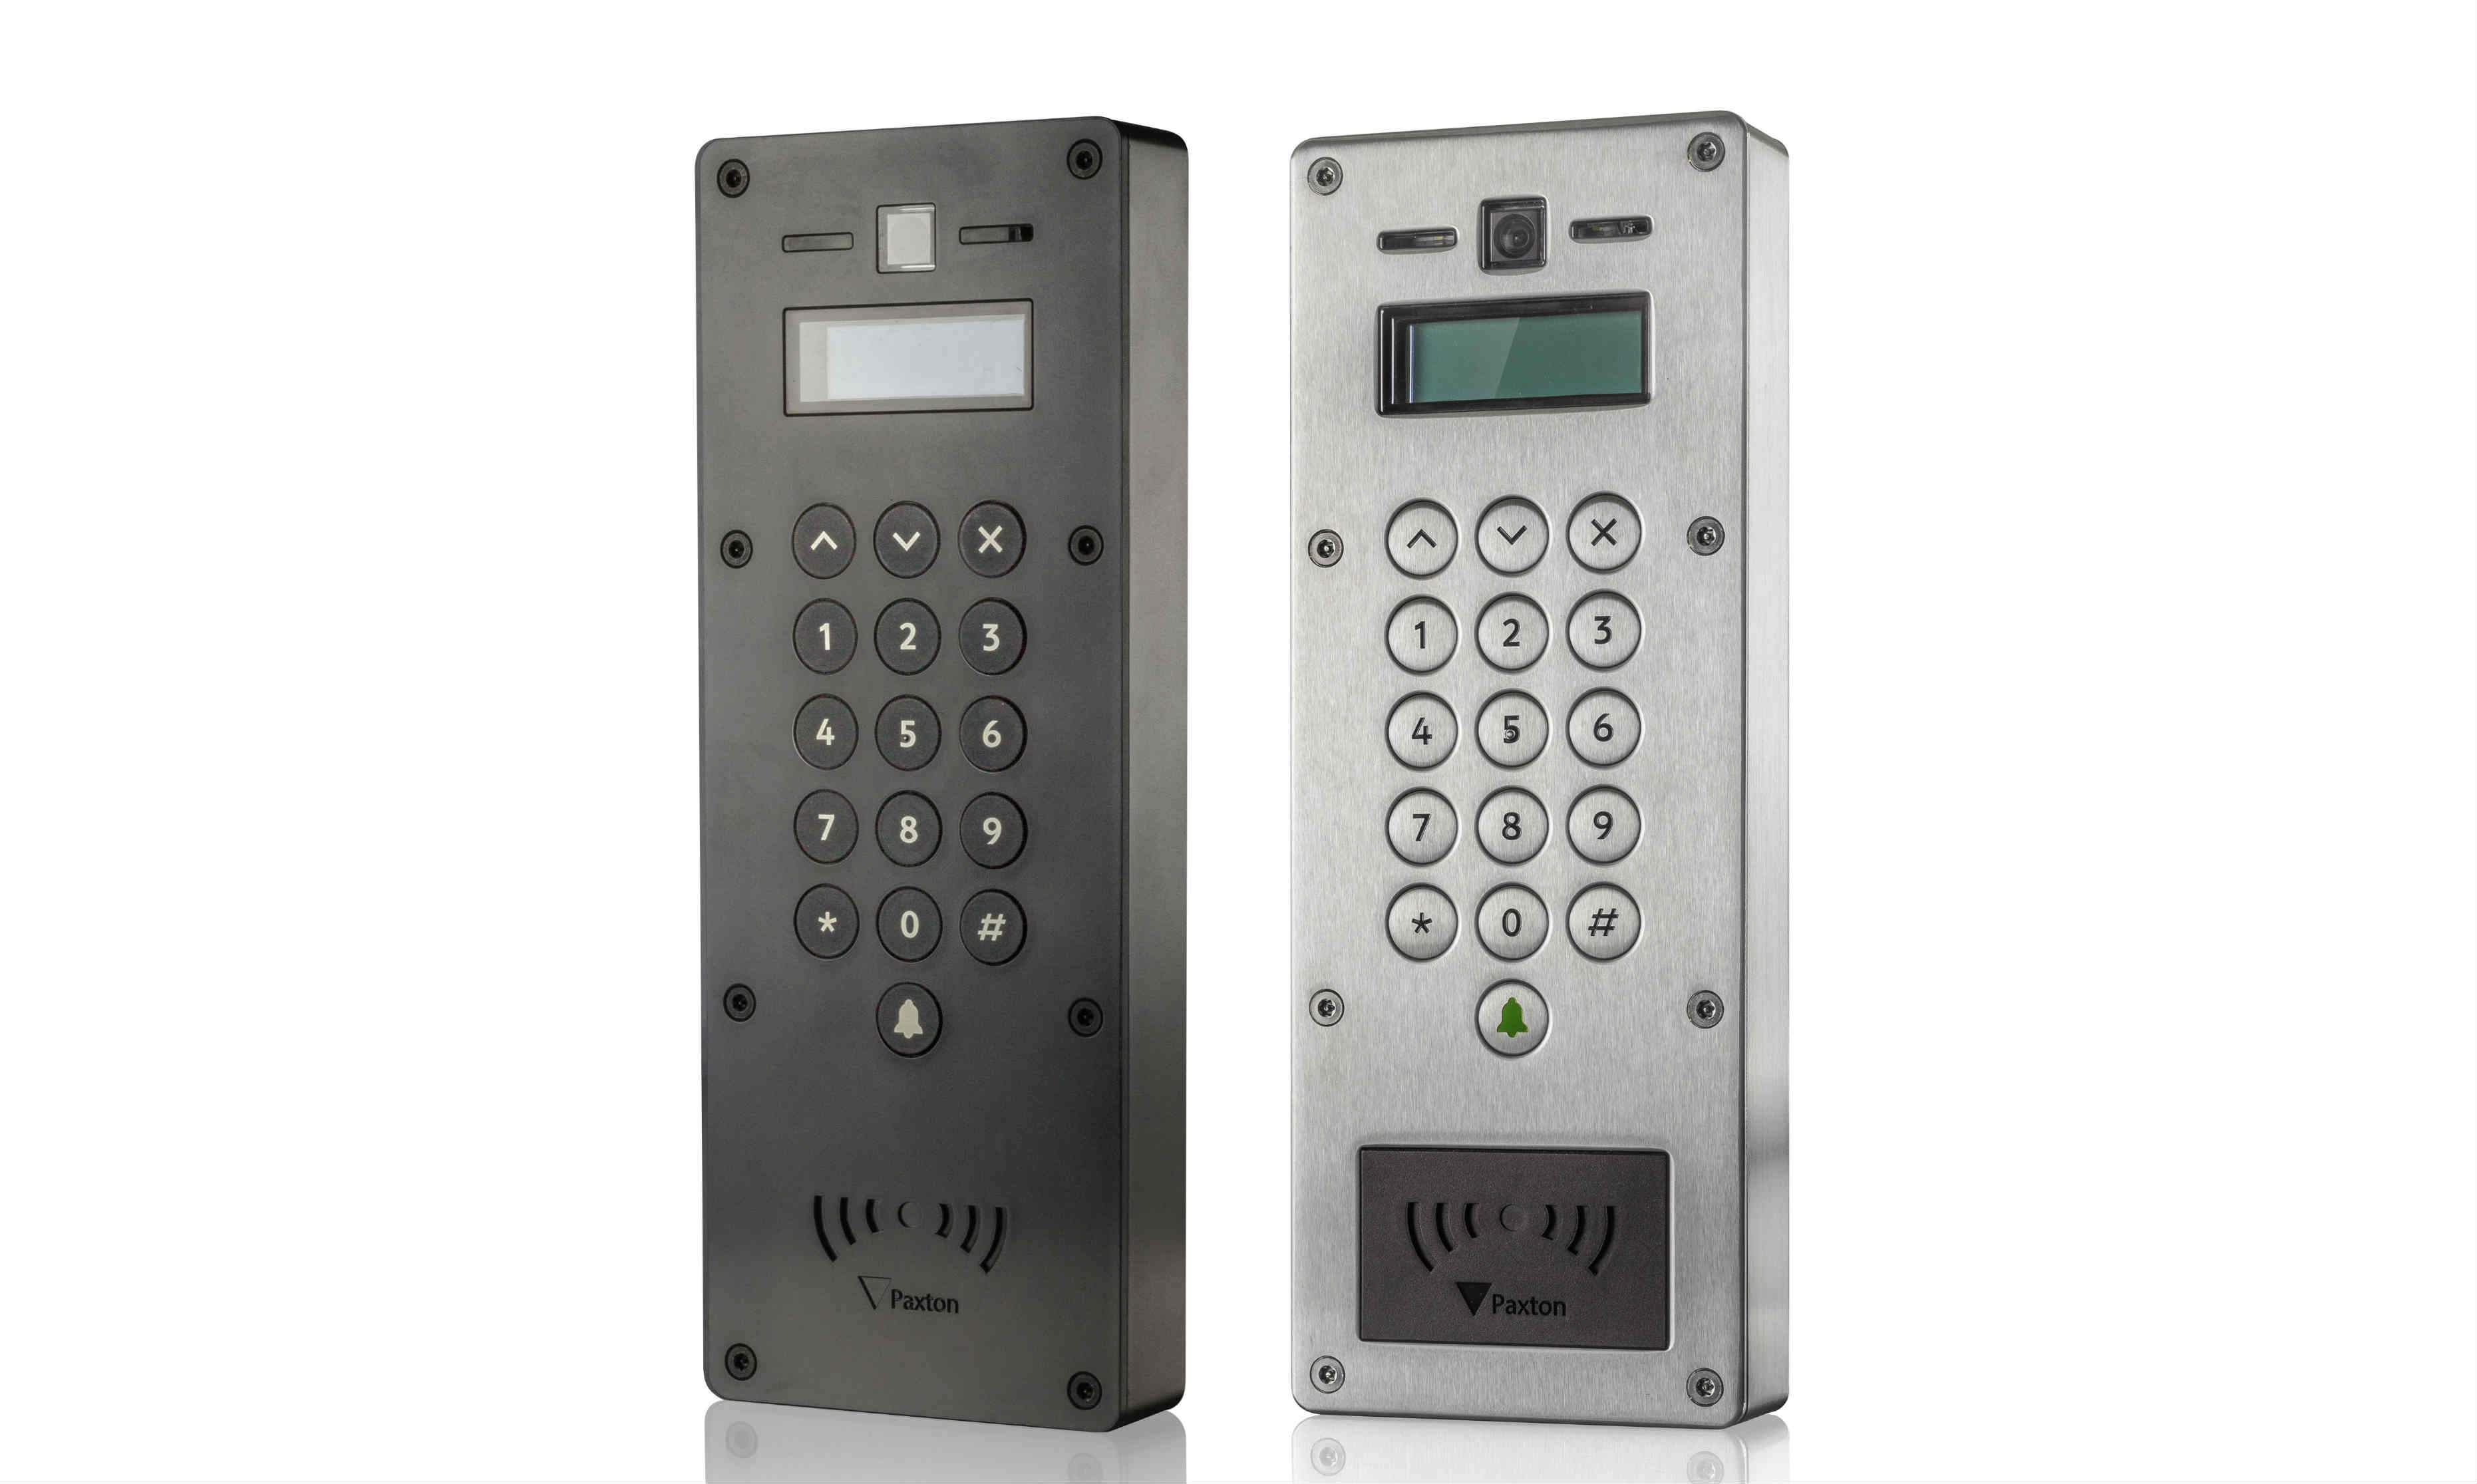 Paxton, Global Manufacturer of Access Control to Showcase the Next Generation in Door Entry at Intersec, Dubai